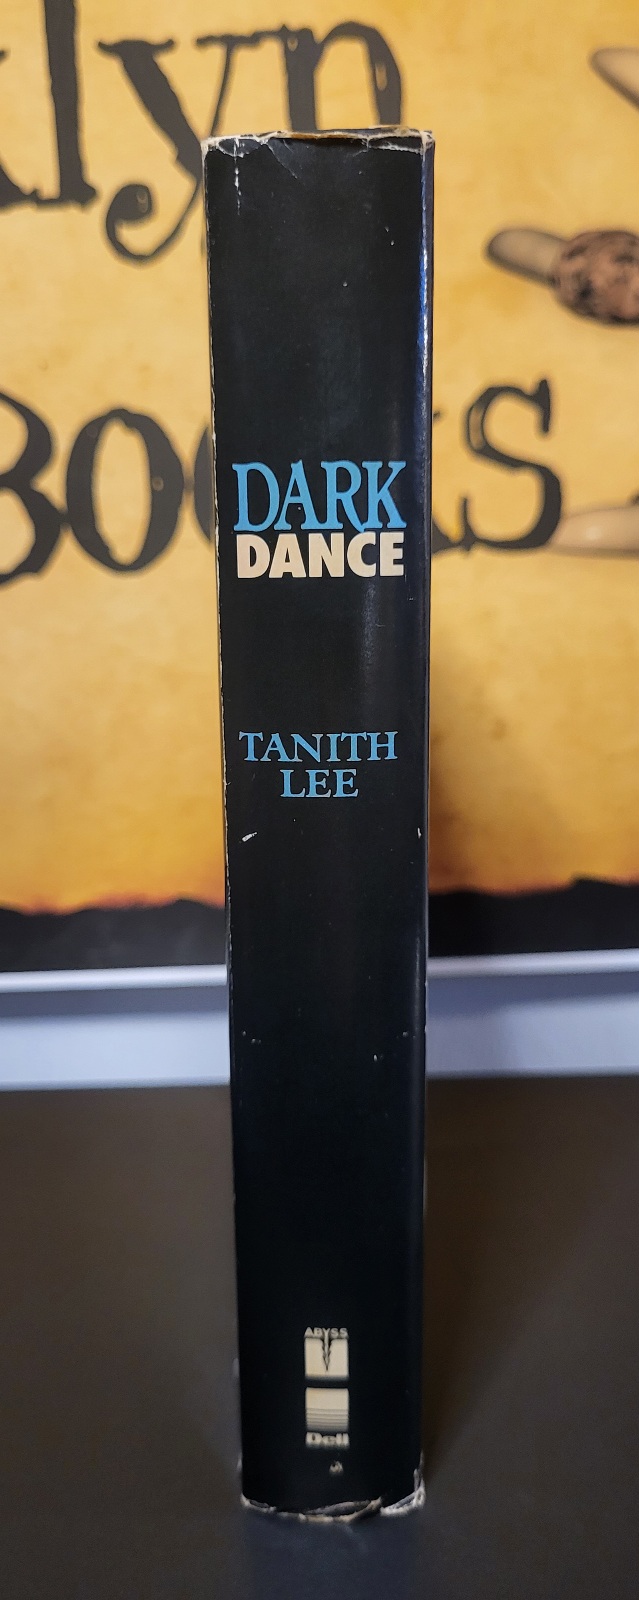 Dark Dance by Tanith Lee Hardcover Dell Abyss Reprint